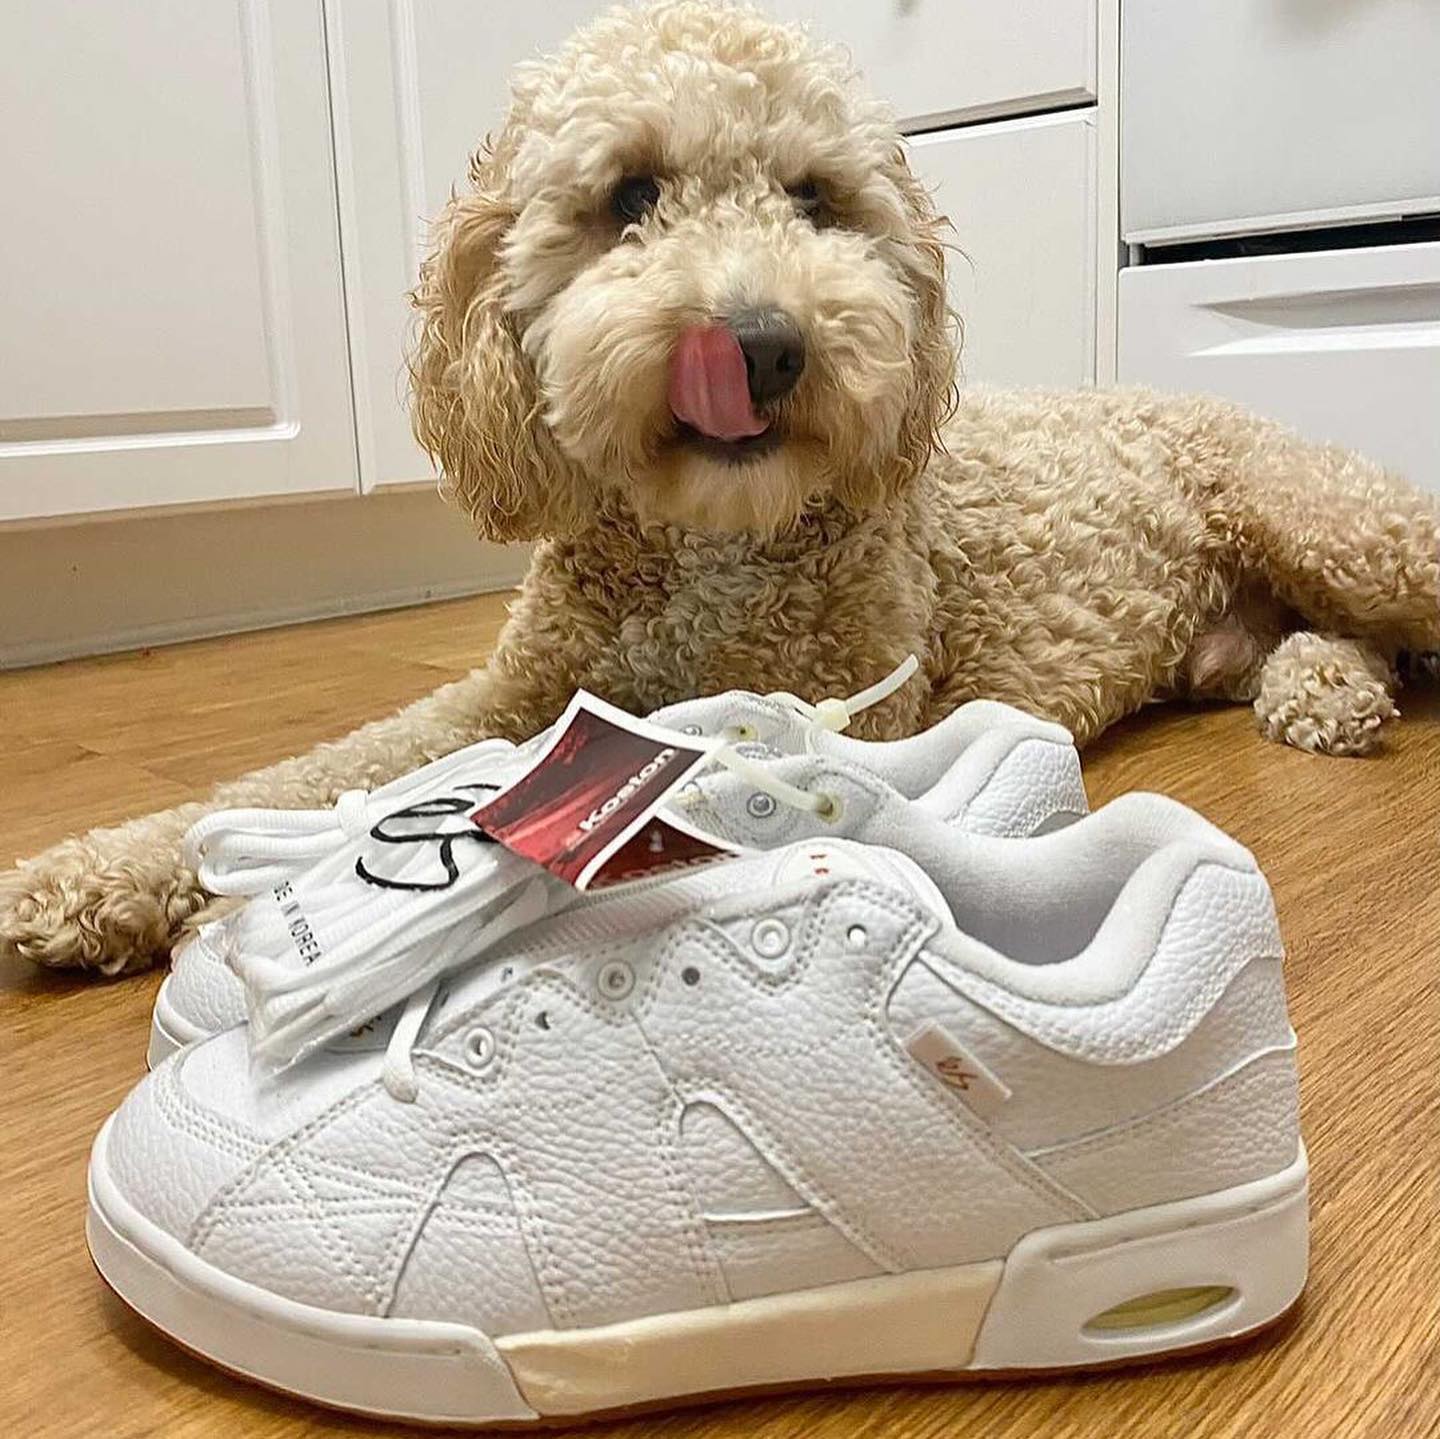 @bijan.zahedi is selling some gnarly #esskateboarding KOSTON 1s size 9.5 ( @bixby_doodle not included). Hit him up to cop, NOT US.  #sk8shoewars